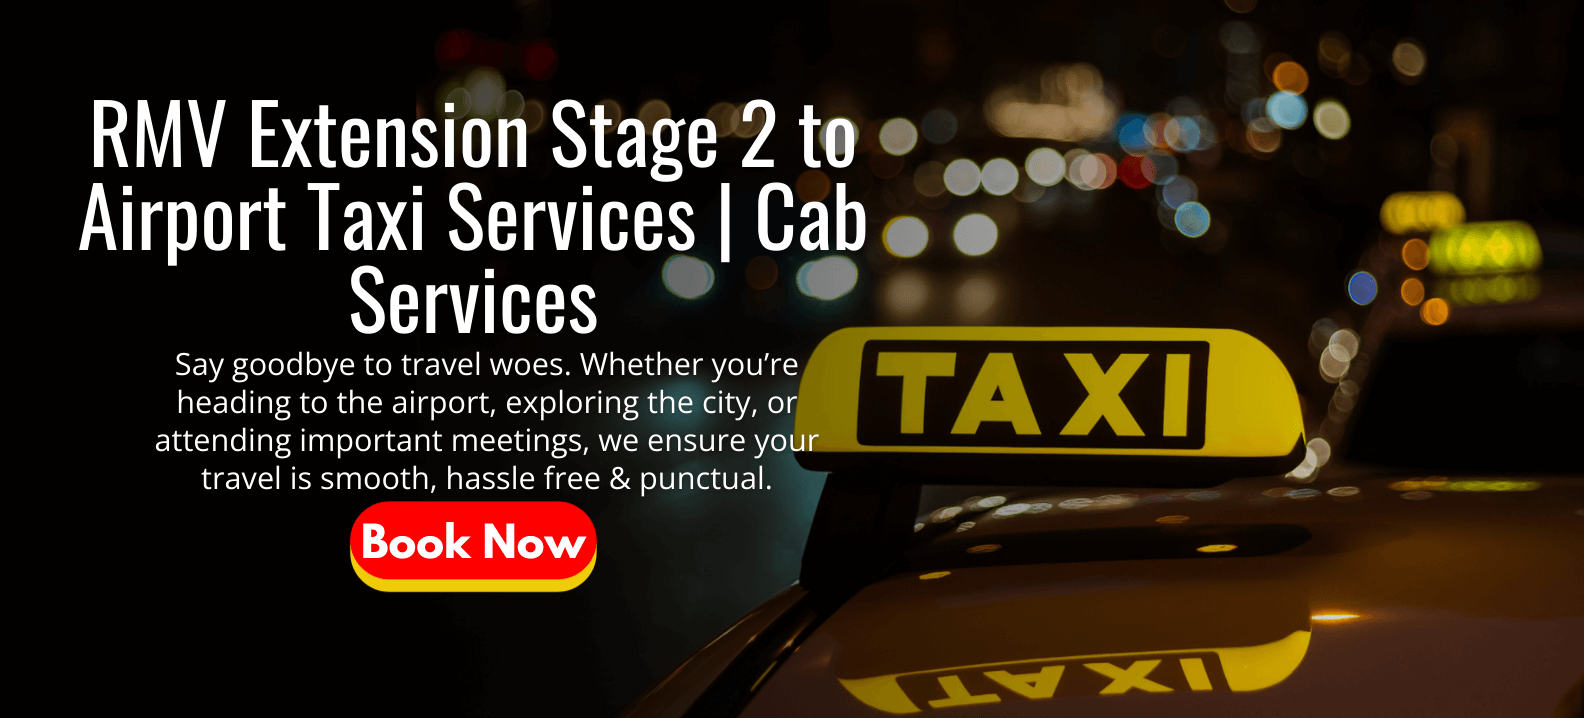 RMV Extension Stage 2 to Airport Taxi Services | Cab Services